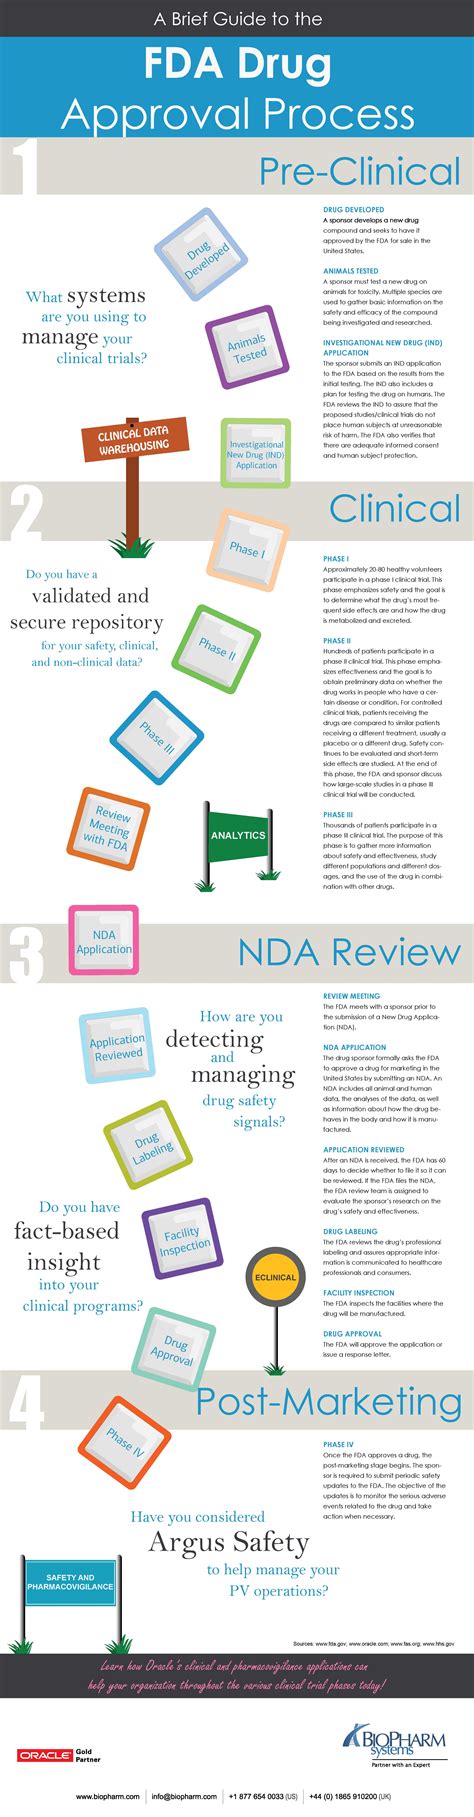 a brief guide to the fda drug approval process visual ly